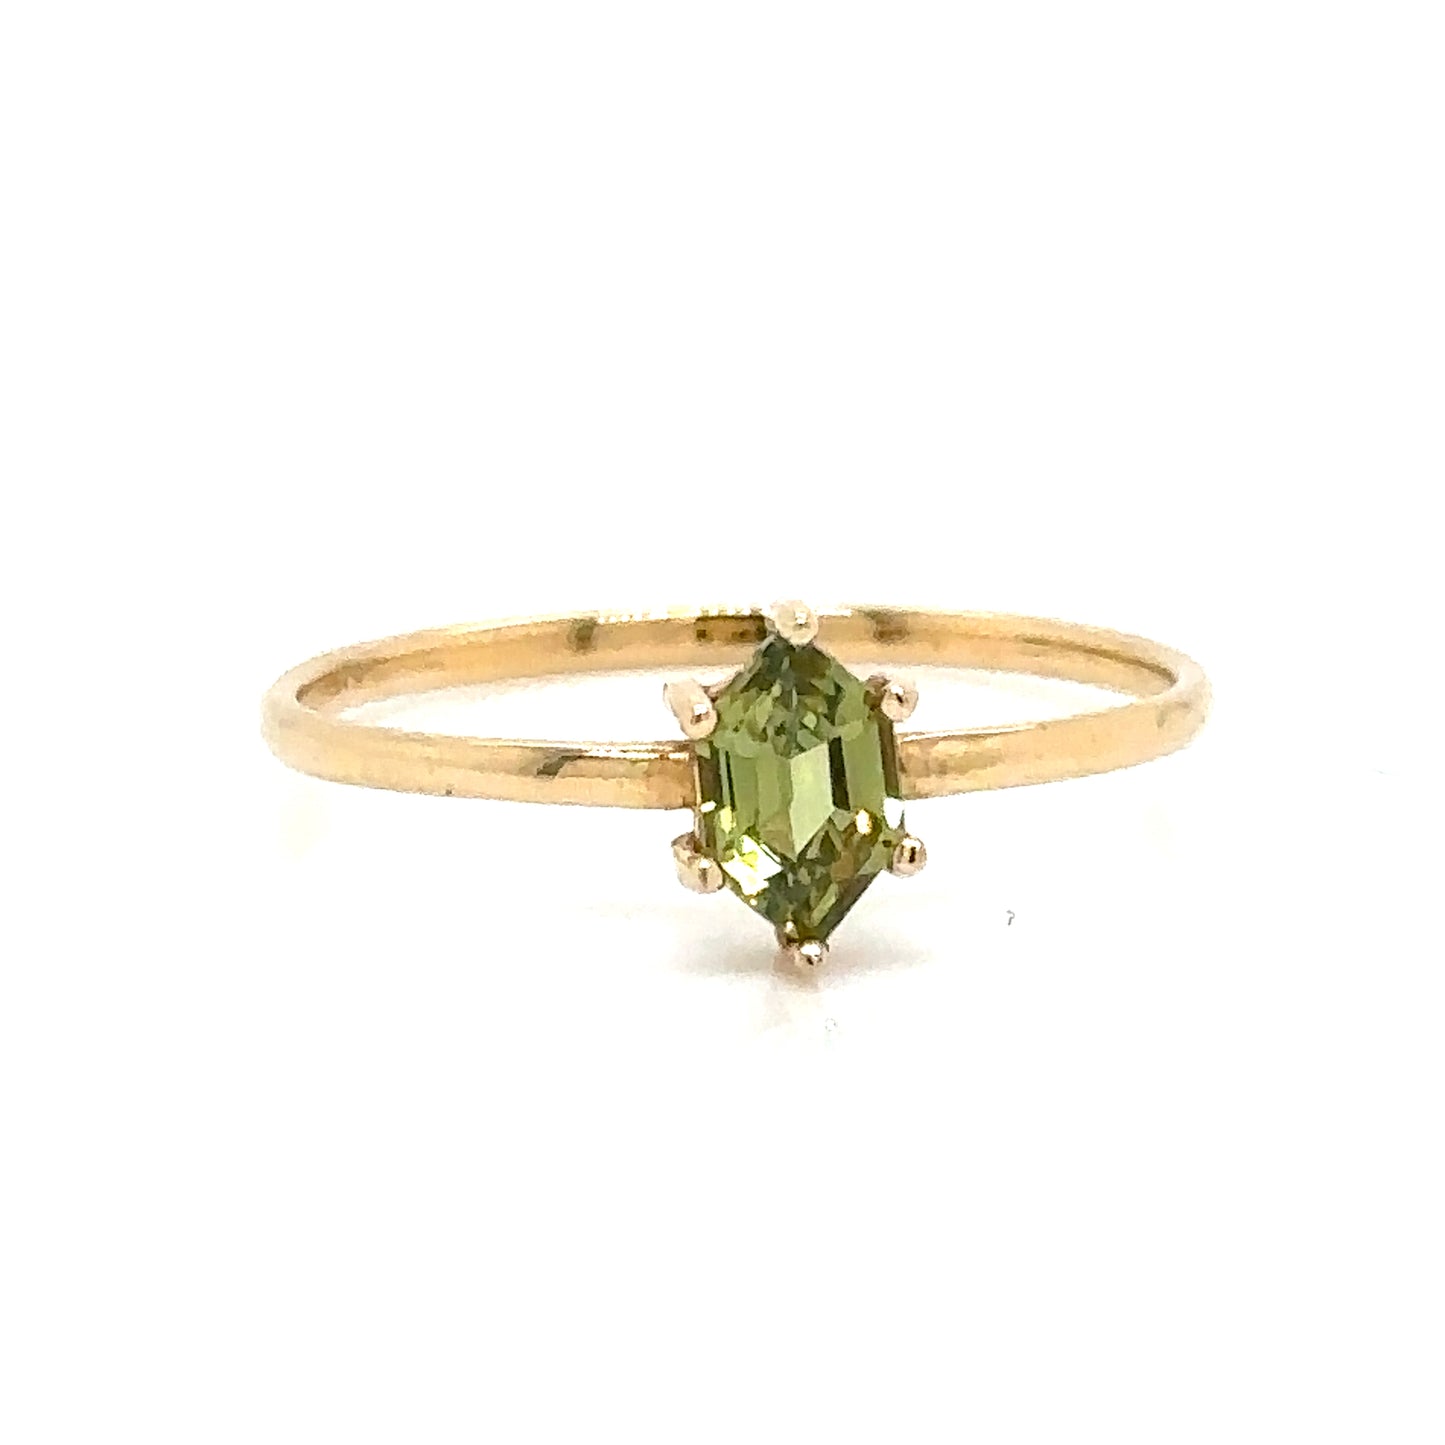 IMMEDIATE DELIVERY / Hexagonal Green Sapphire Ring / 14k yellow gold / size 10